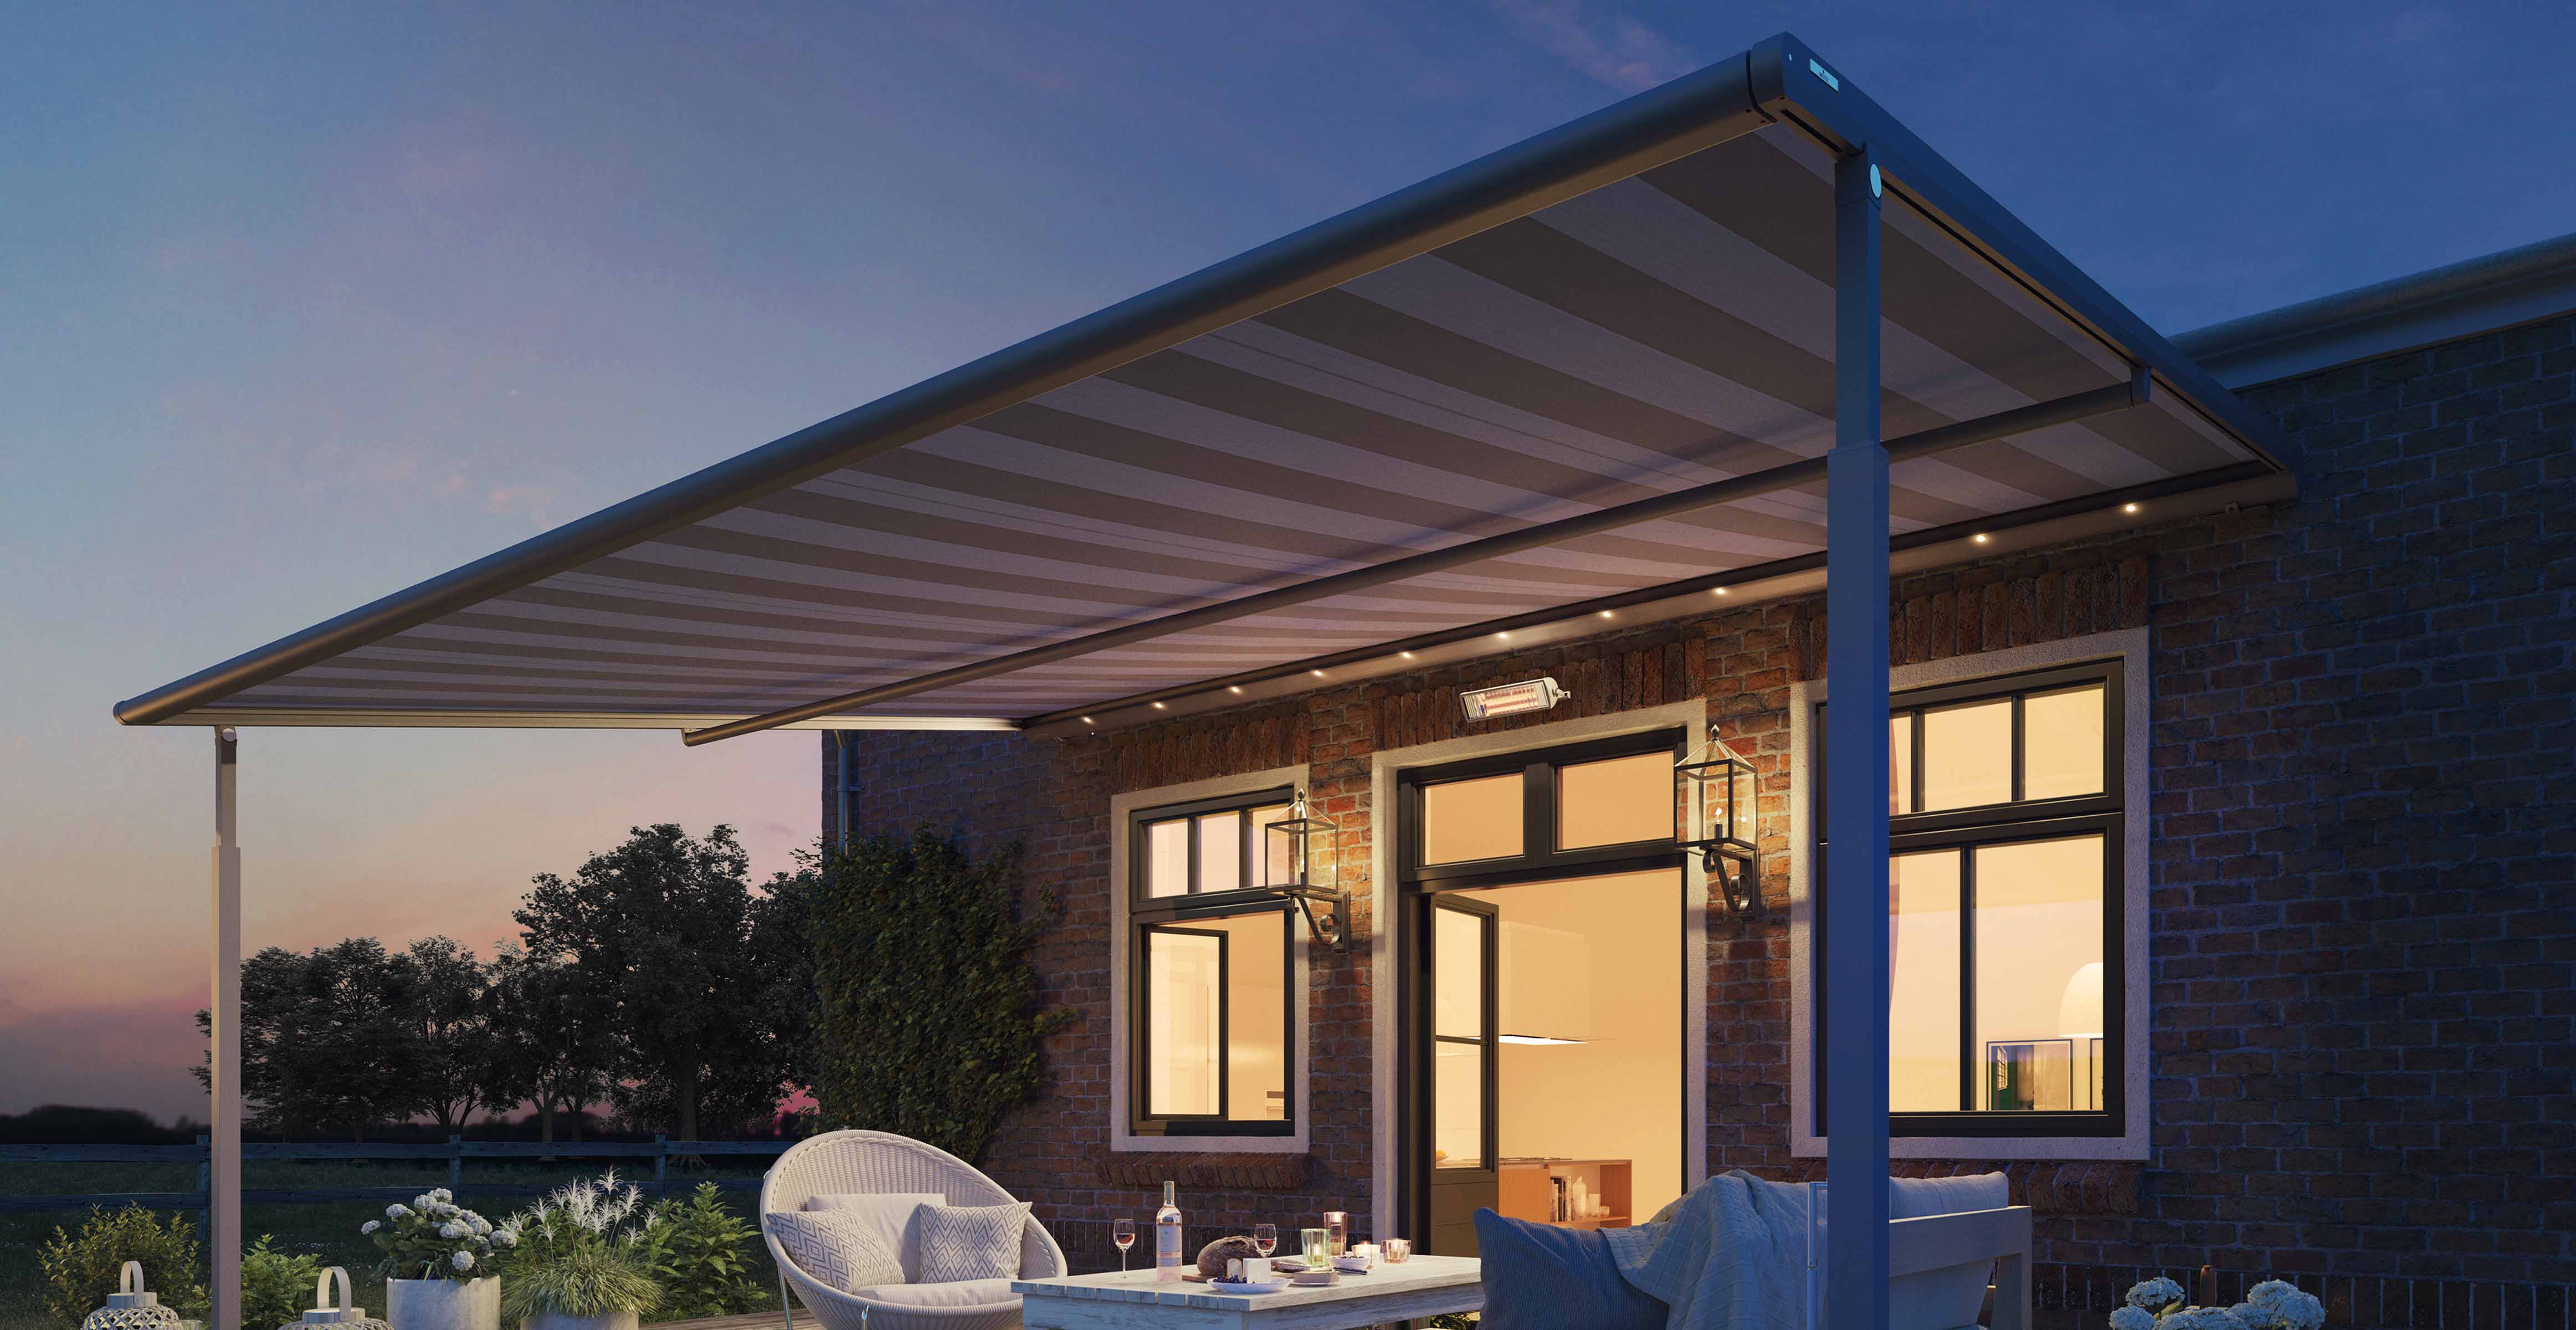 The Plaza Viva Rain Awning with Valance plus gives you more options